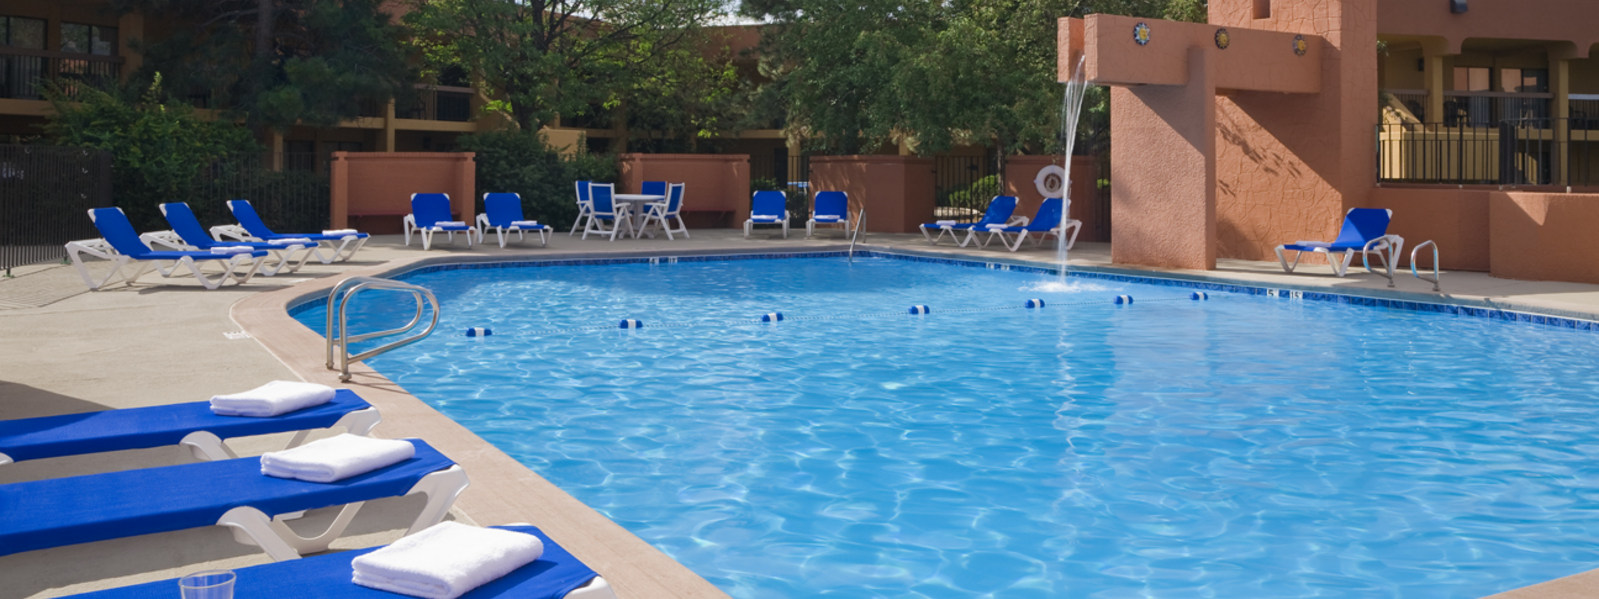 Pool at the Crowne Plaza Colorado Springs Hotel